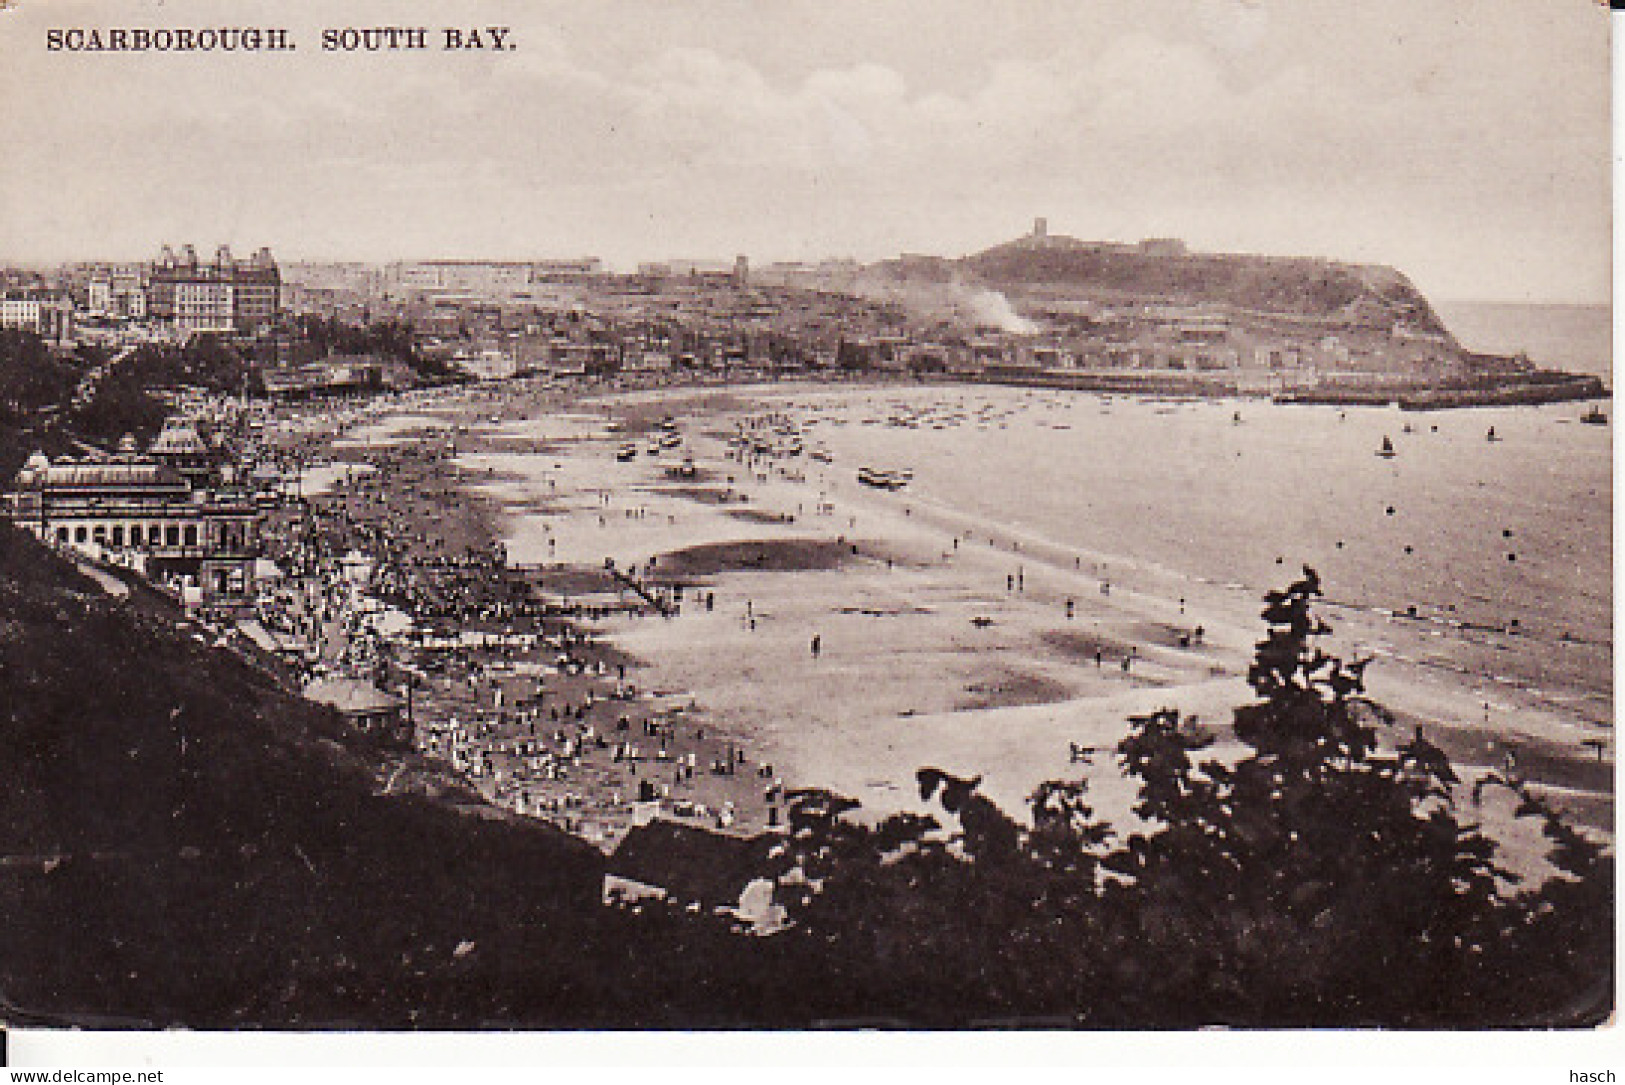 2811	94	Scarborough, South Bay (see Corners) - Scarborough